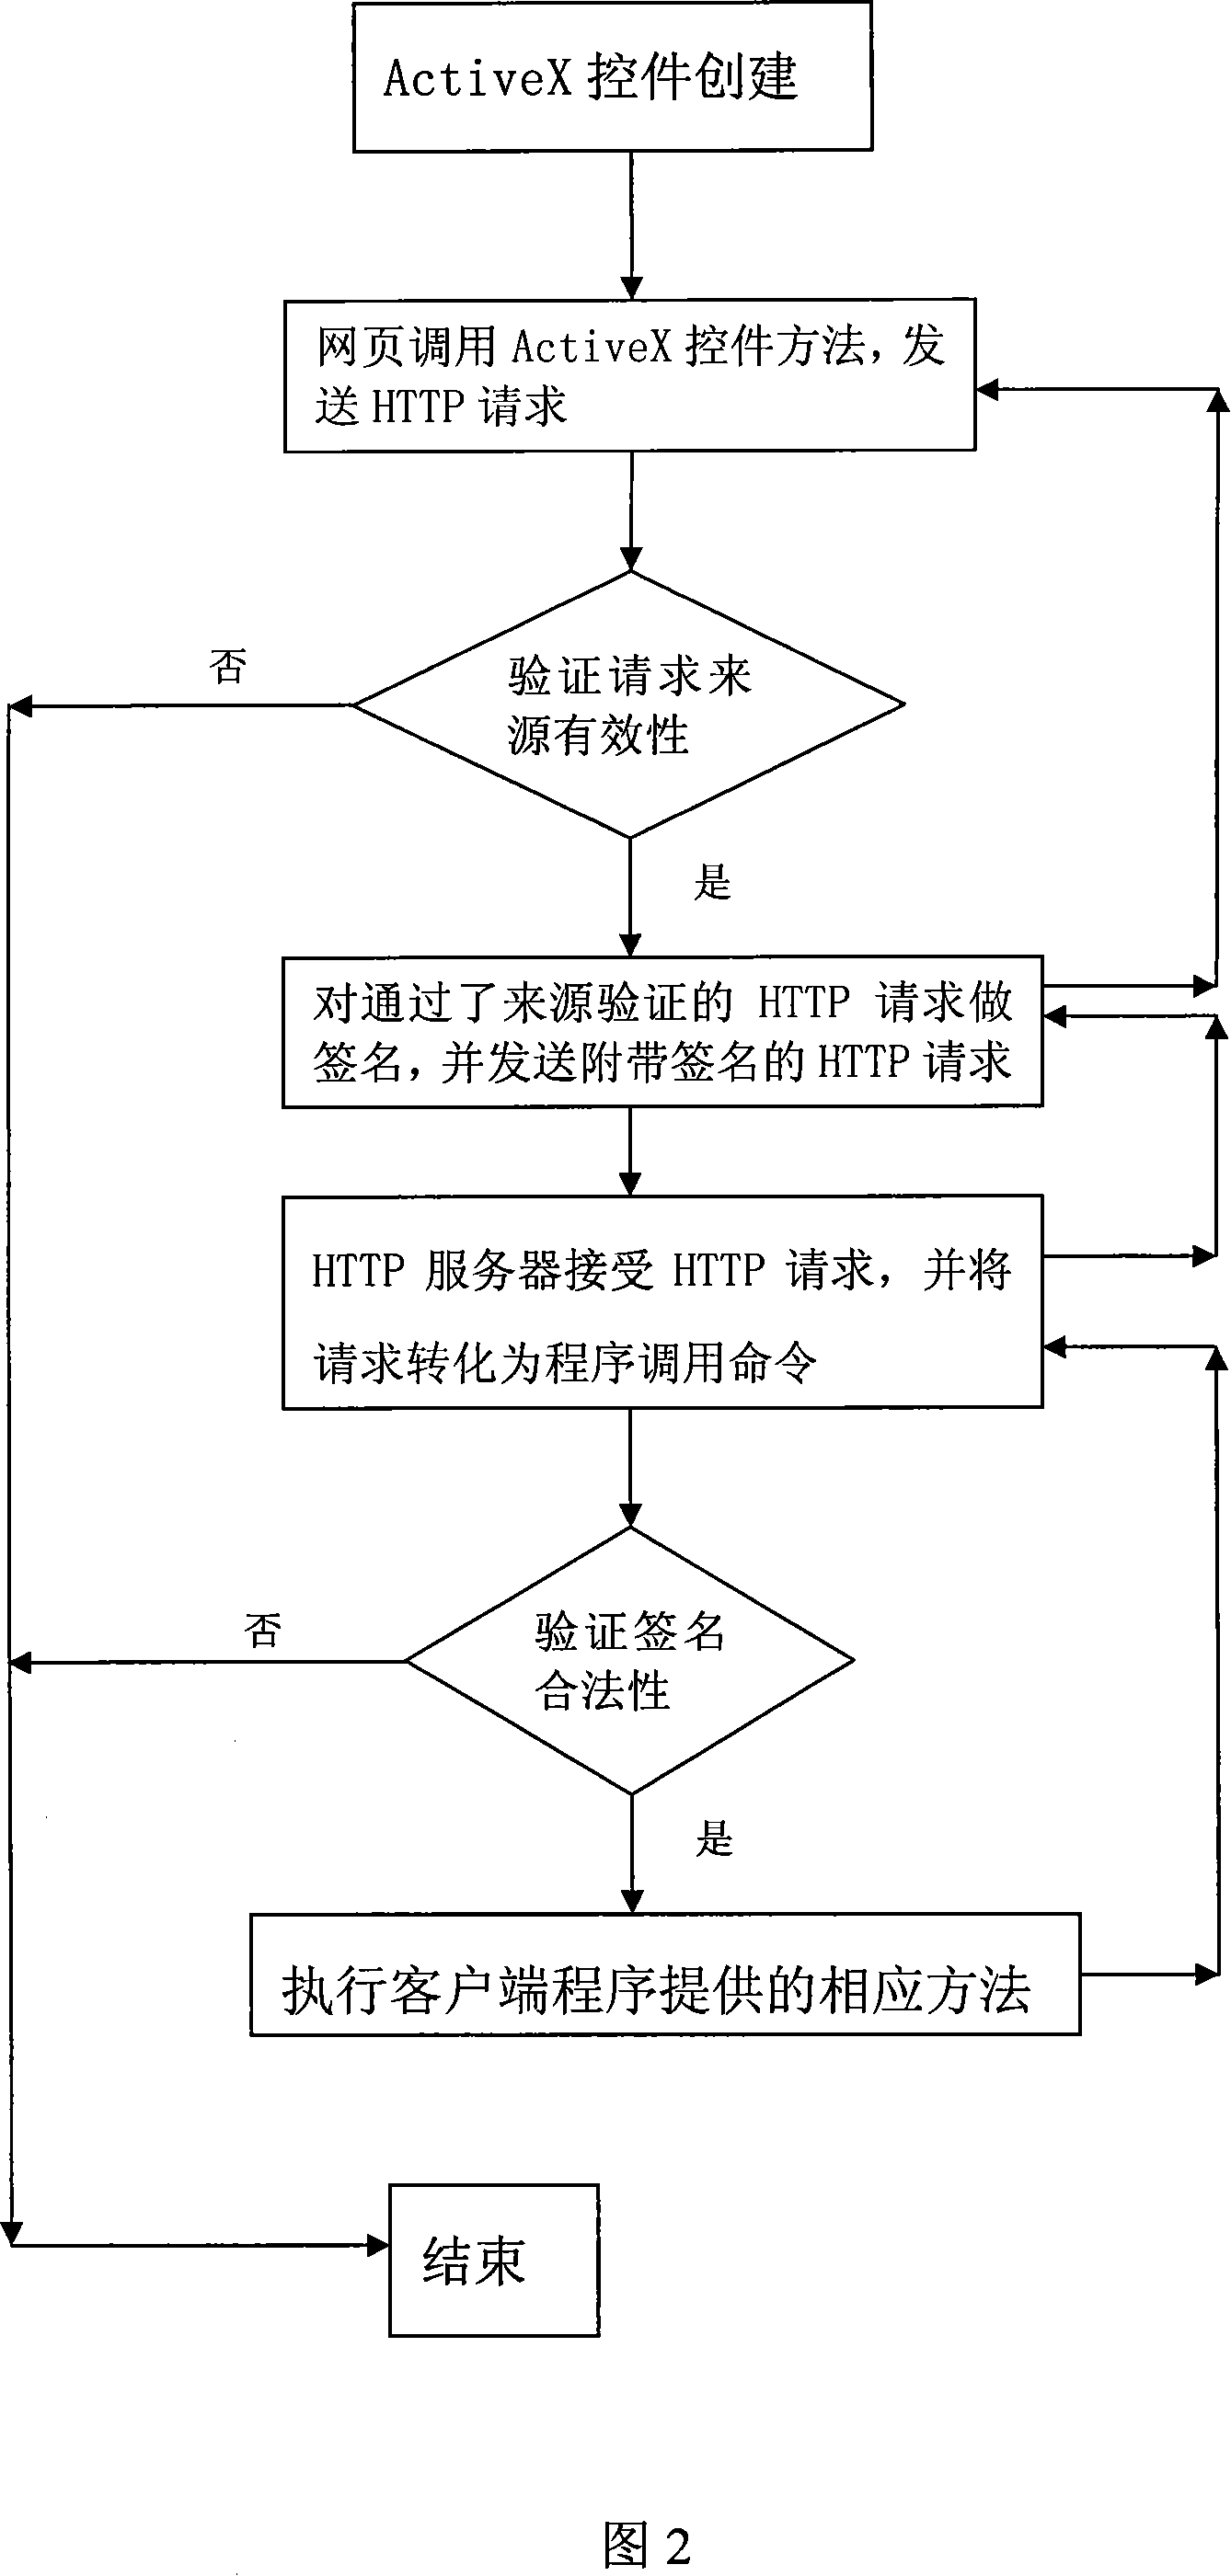 A system and method for secure Internet local function call